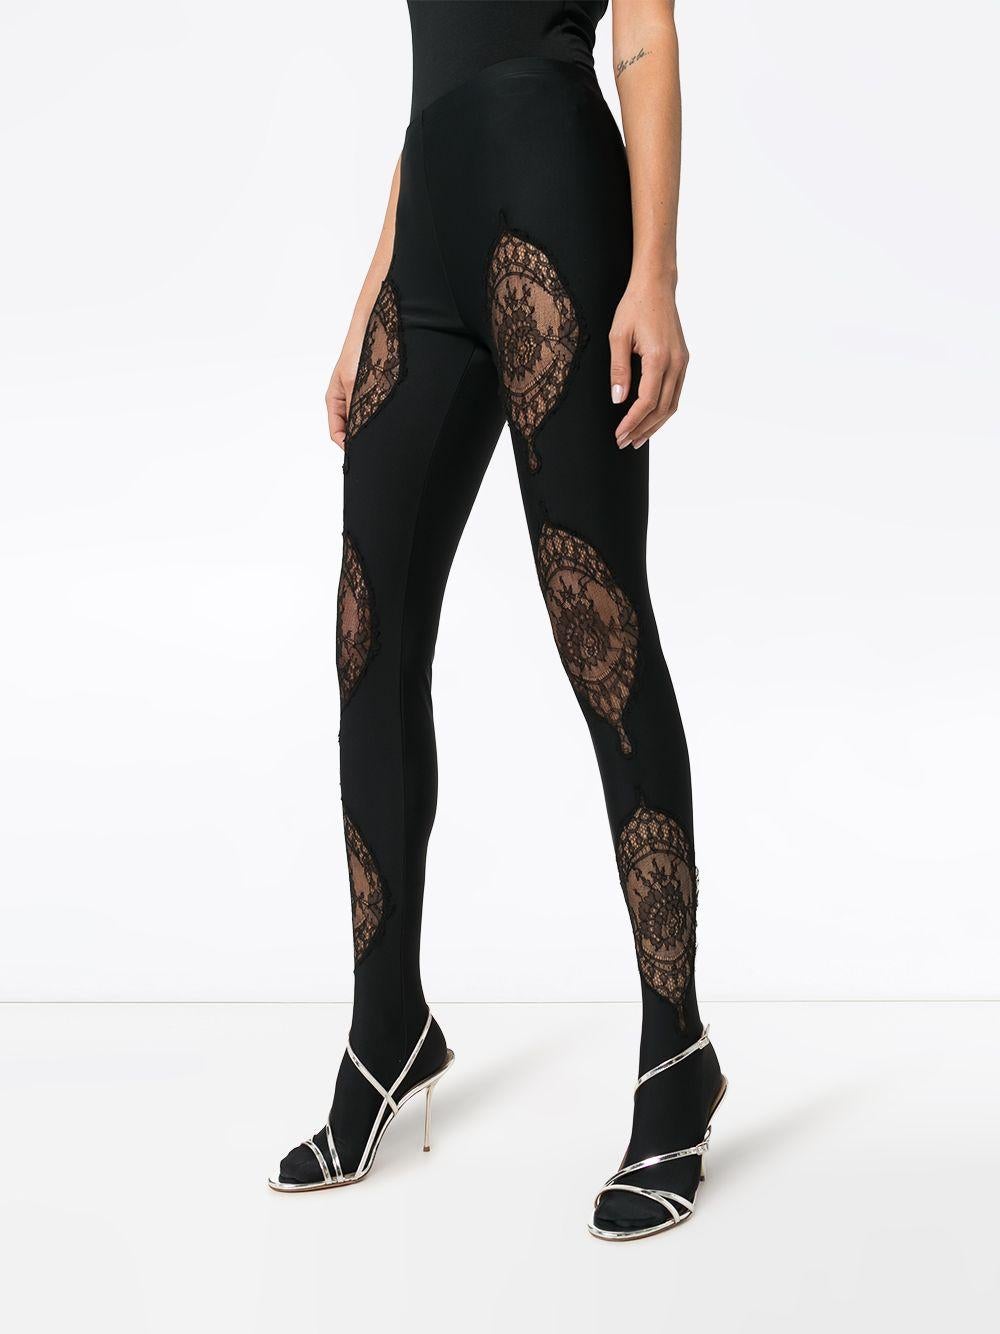 Versace Fall 2019 Runway Black Lace Panelled Jersey Leggings / Tights Size 2 1